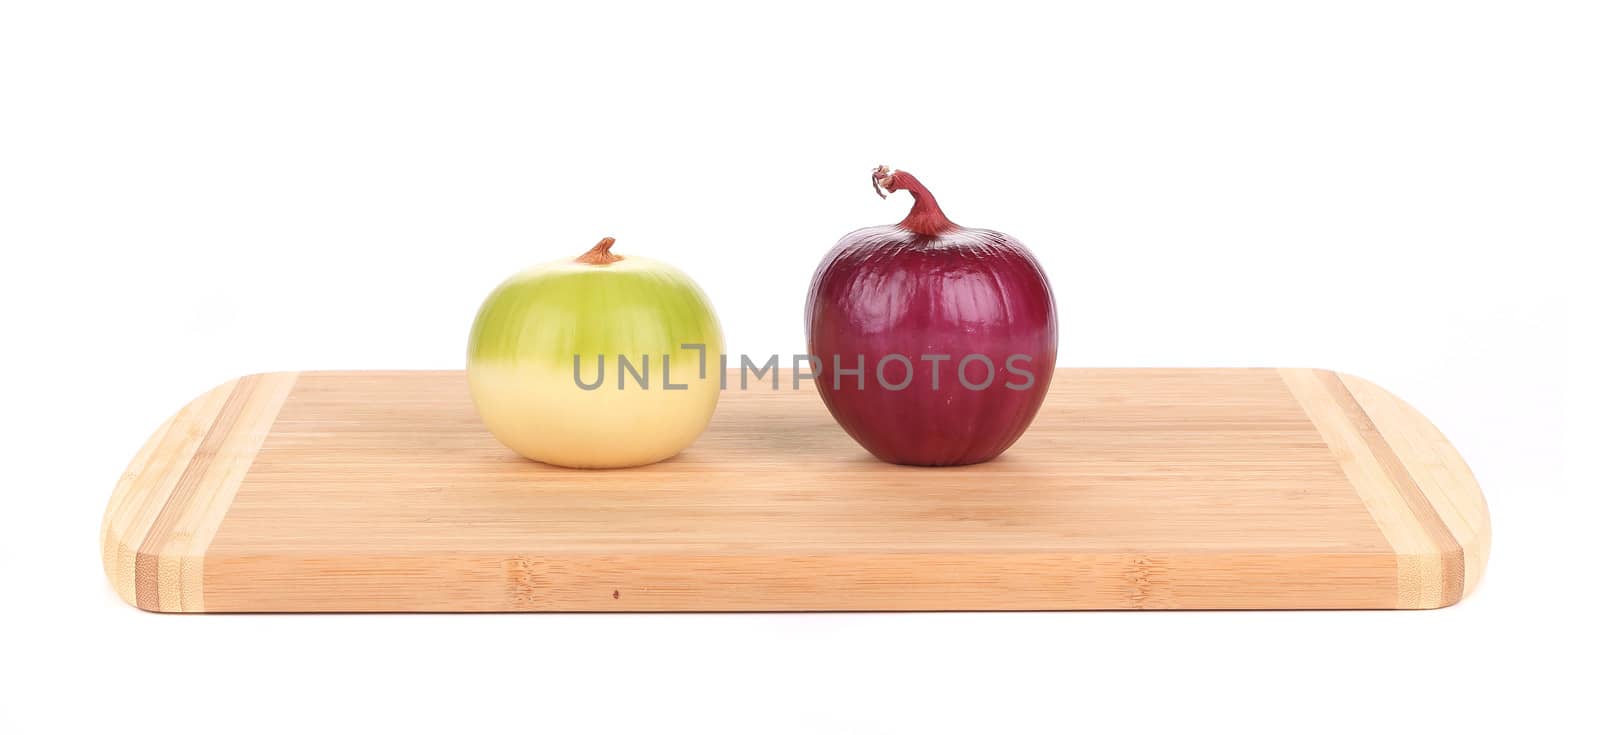 red and white onions on wooden platter by indigolotos